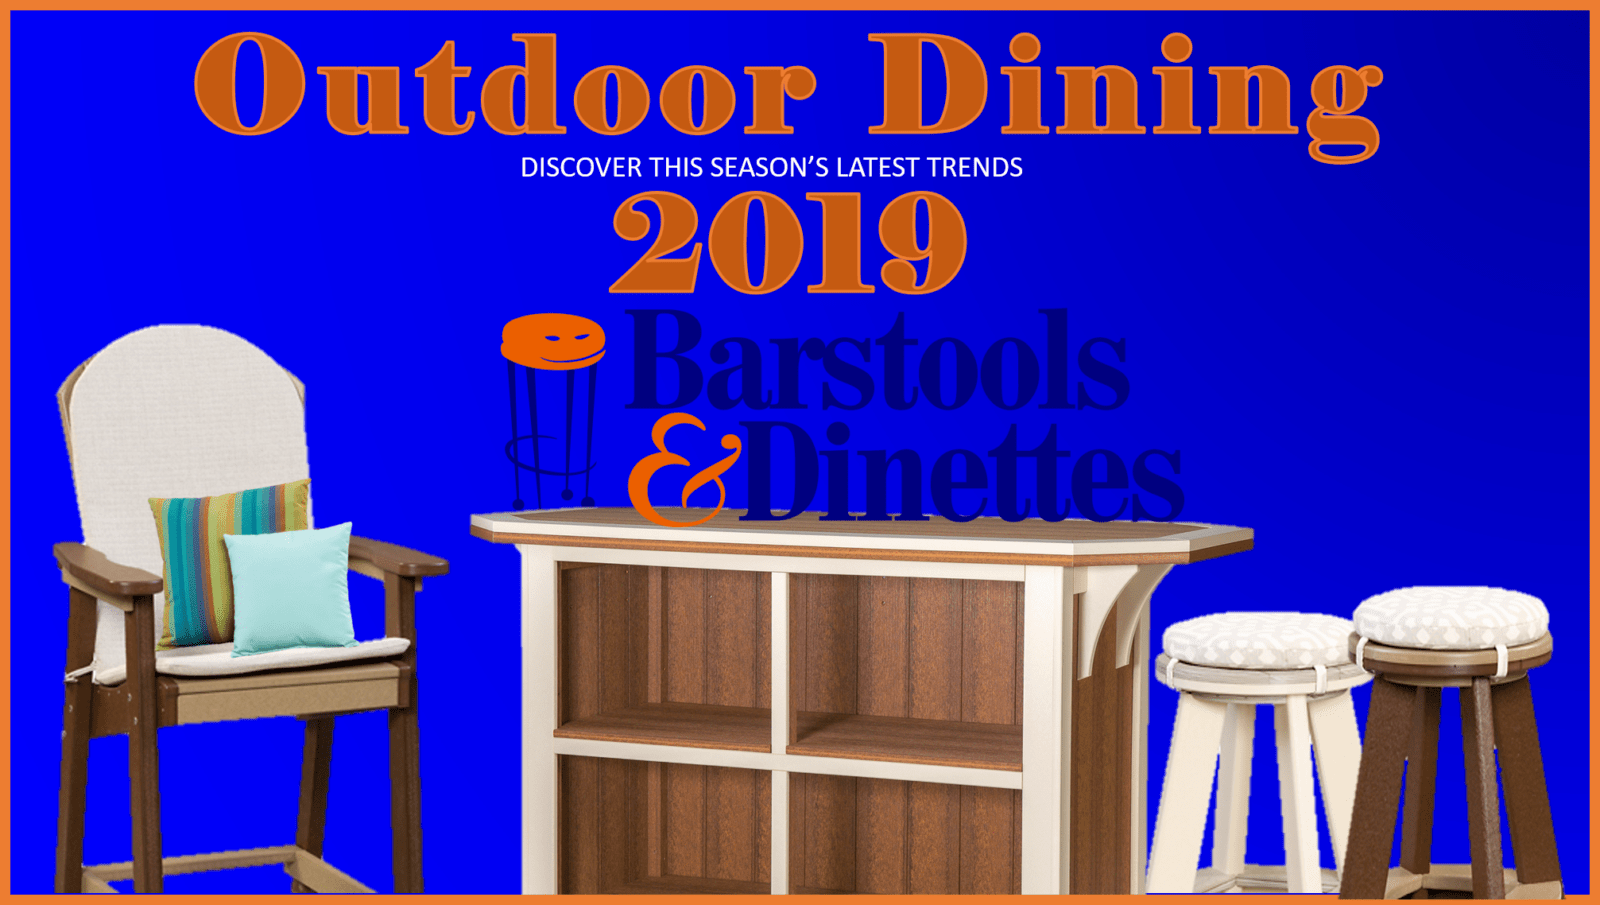 Outdoor Dining Trends 2019 - discover the latest season's trends